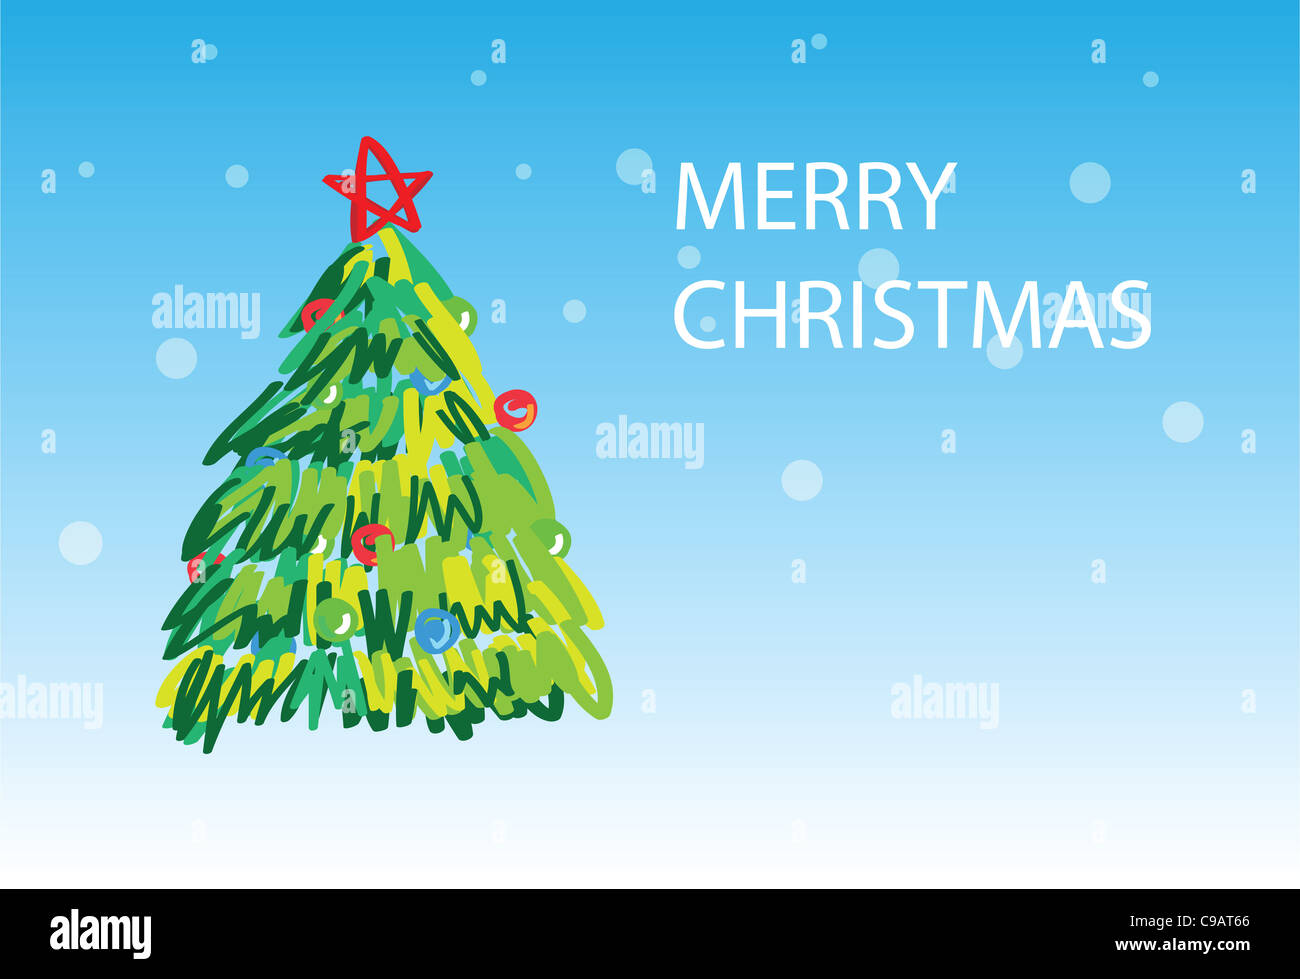 Christmas tree on snowing background, Christmas greetings. 1 of the 6 same styled Christmas cards. Stock Photo